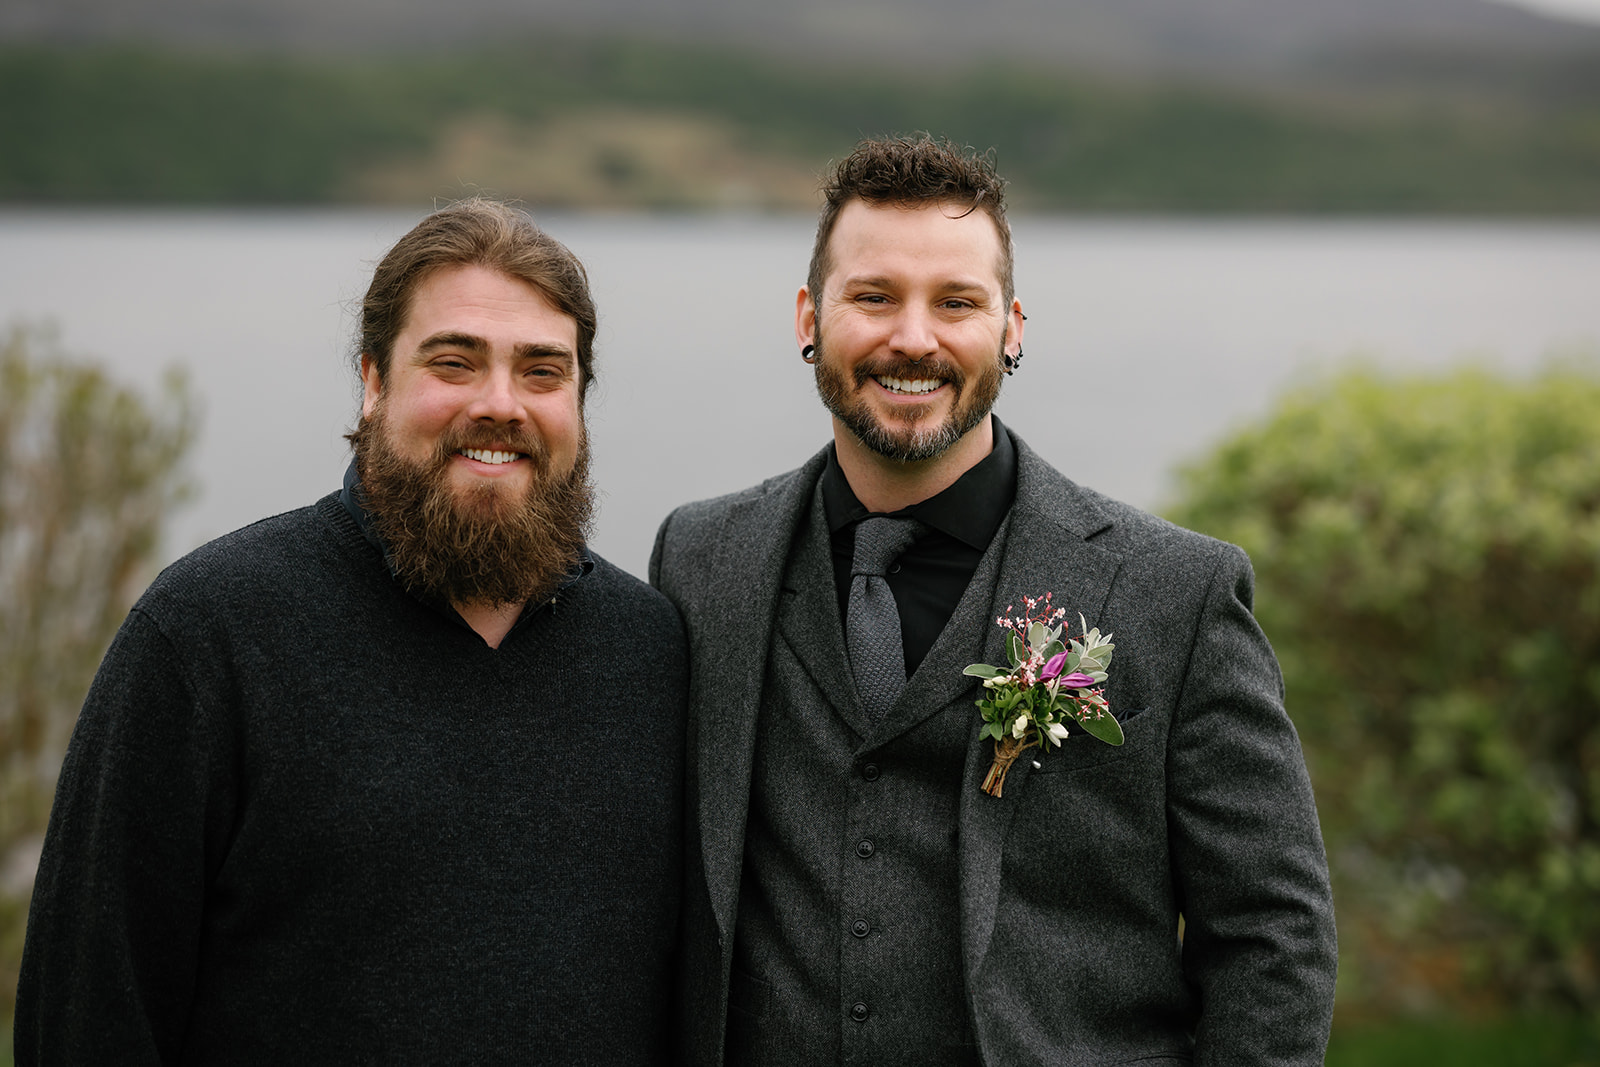 Groom Nick, flanked by his best man and officiant Wes, shares a dram of local Skye whisky, Talisker